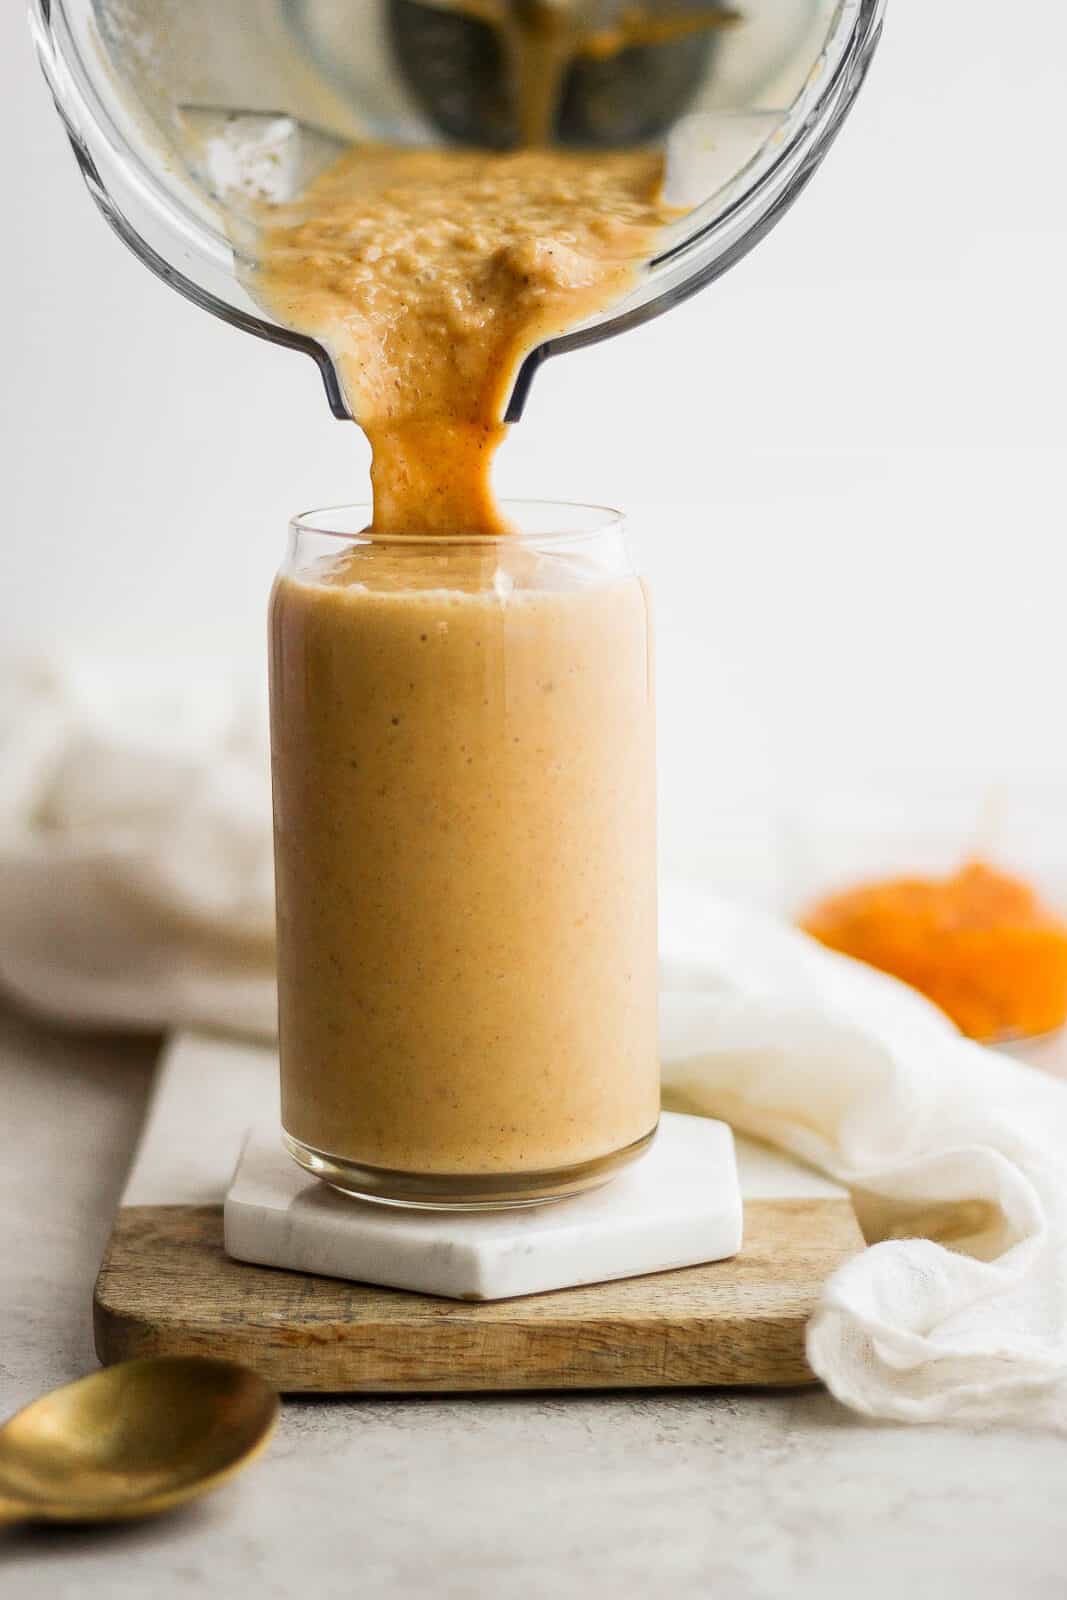 Pumpkin smoothie being poured from a blender into a glass.